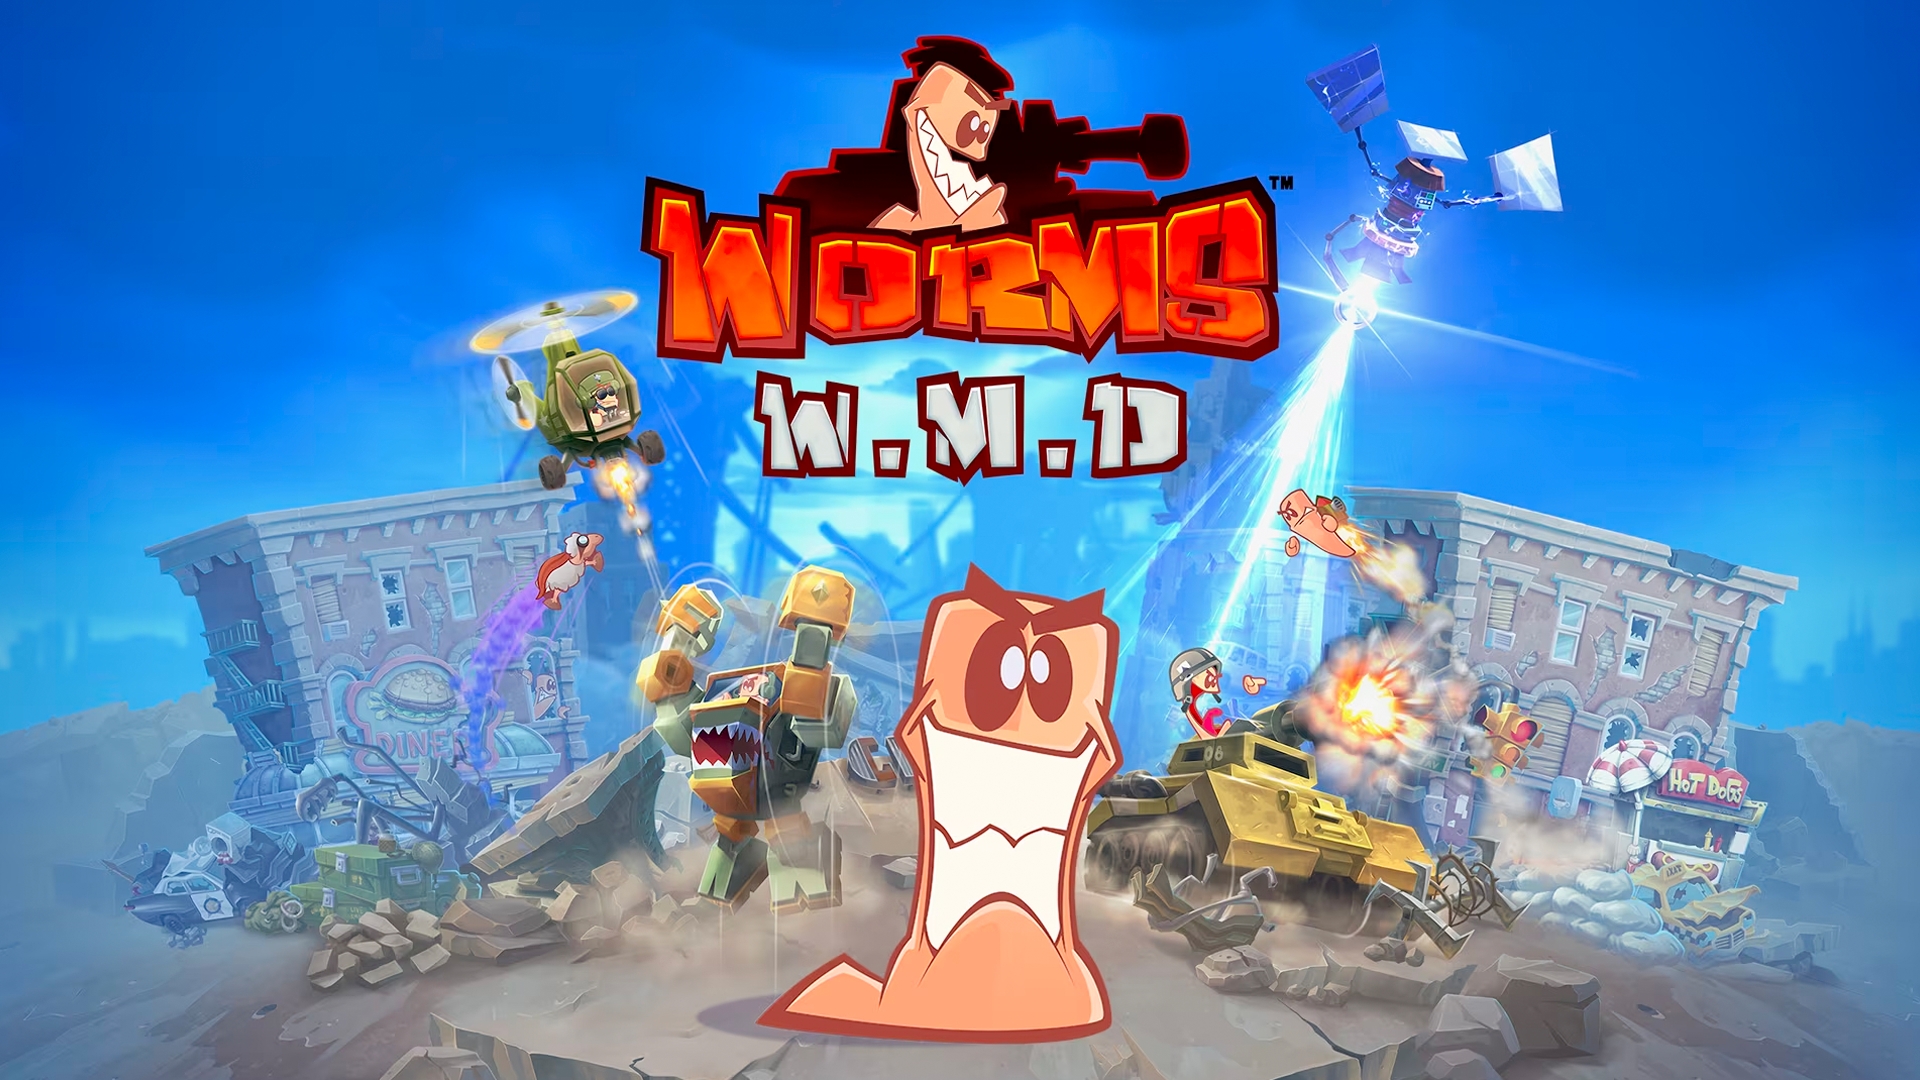 play worms for free osx sierra